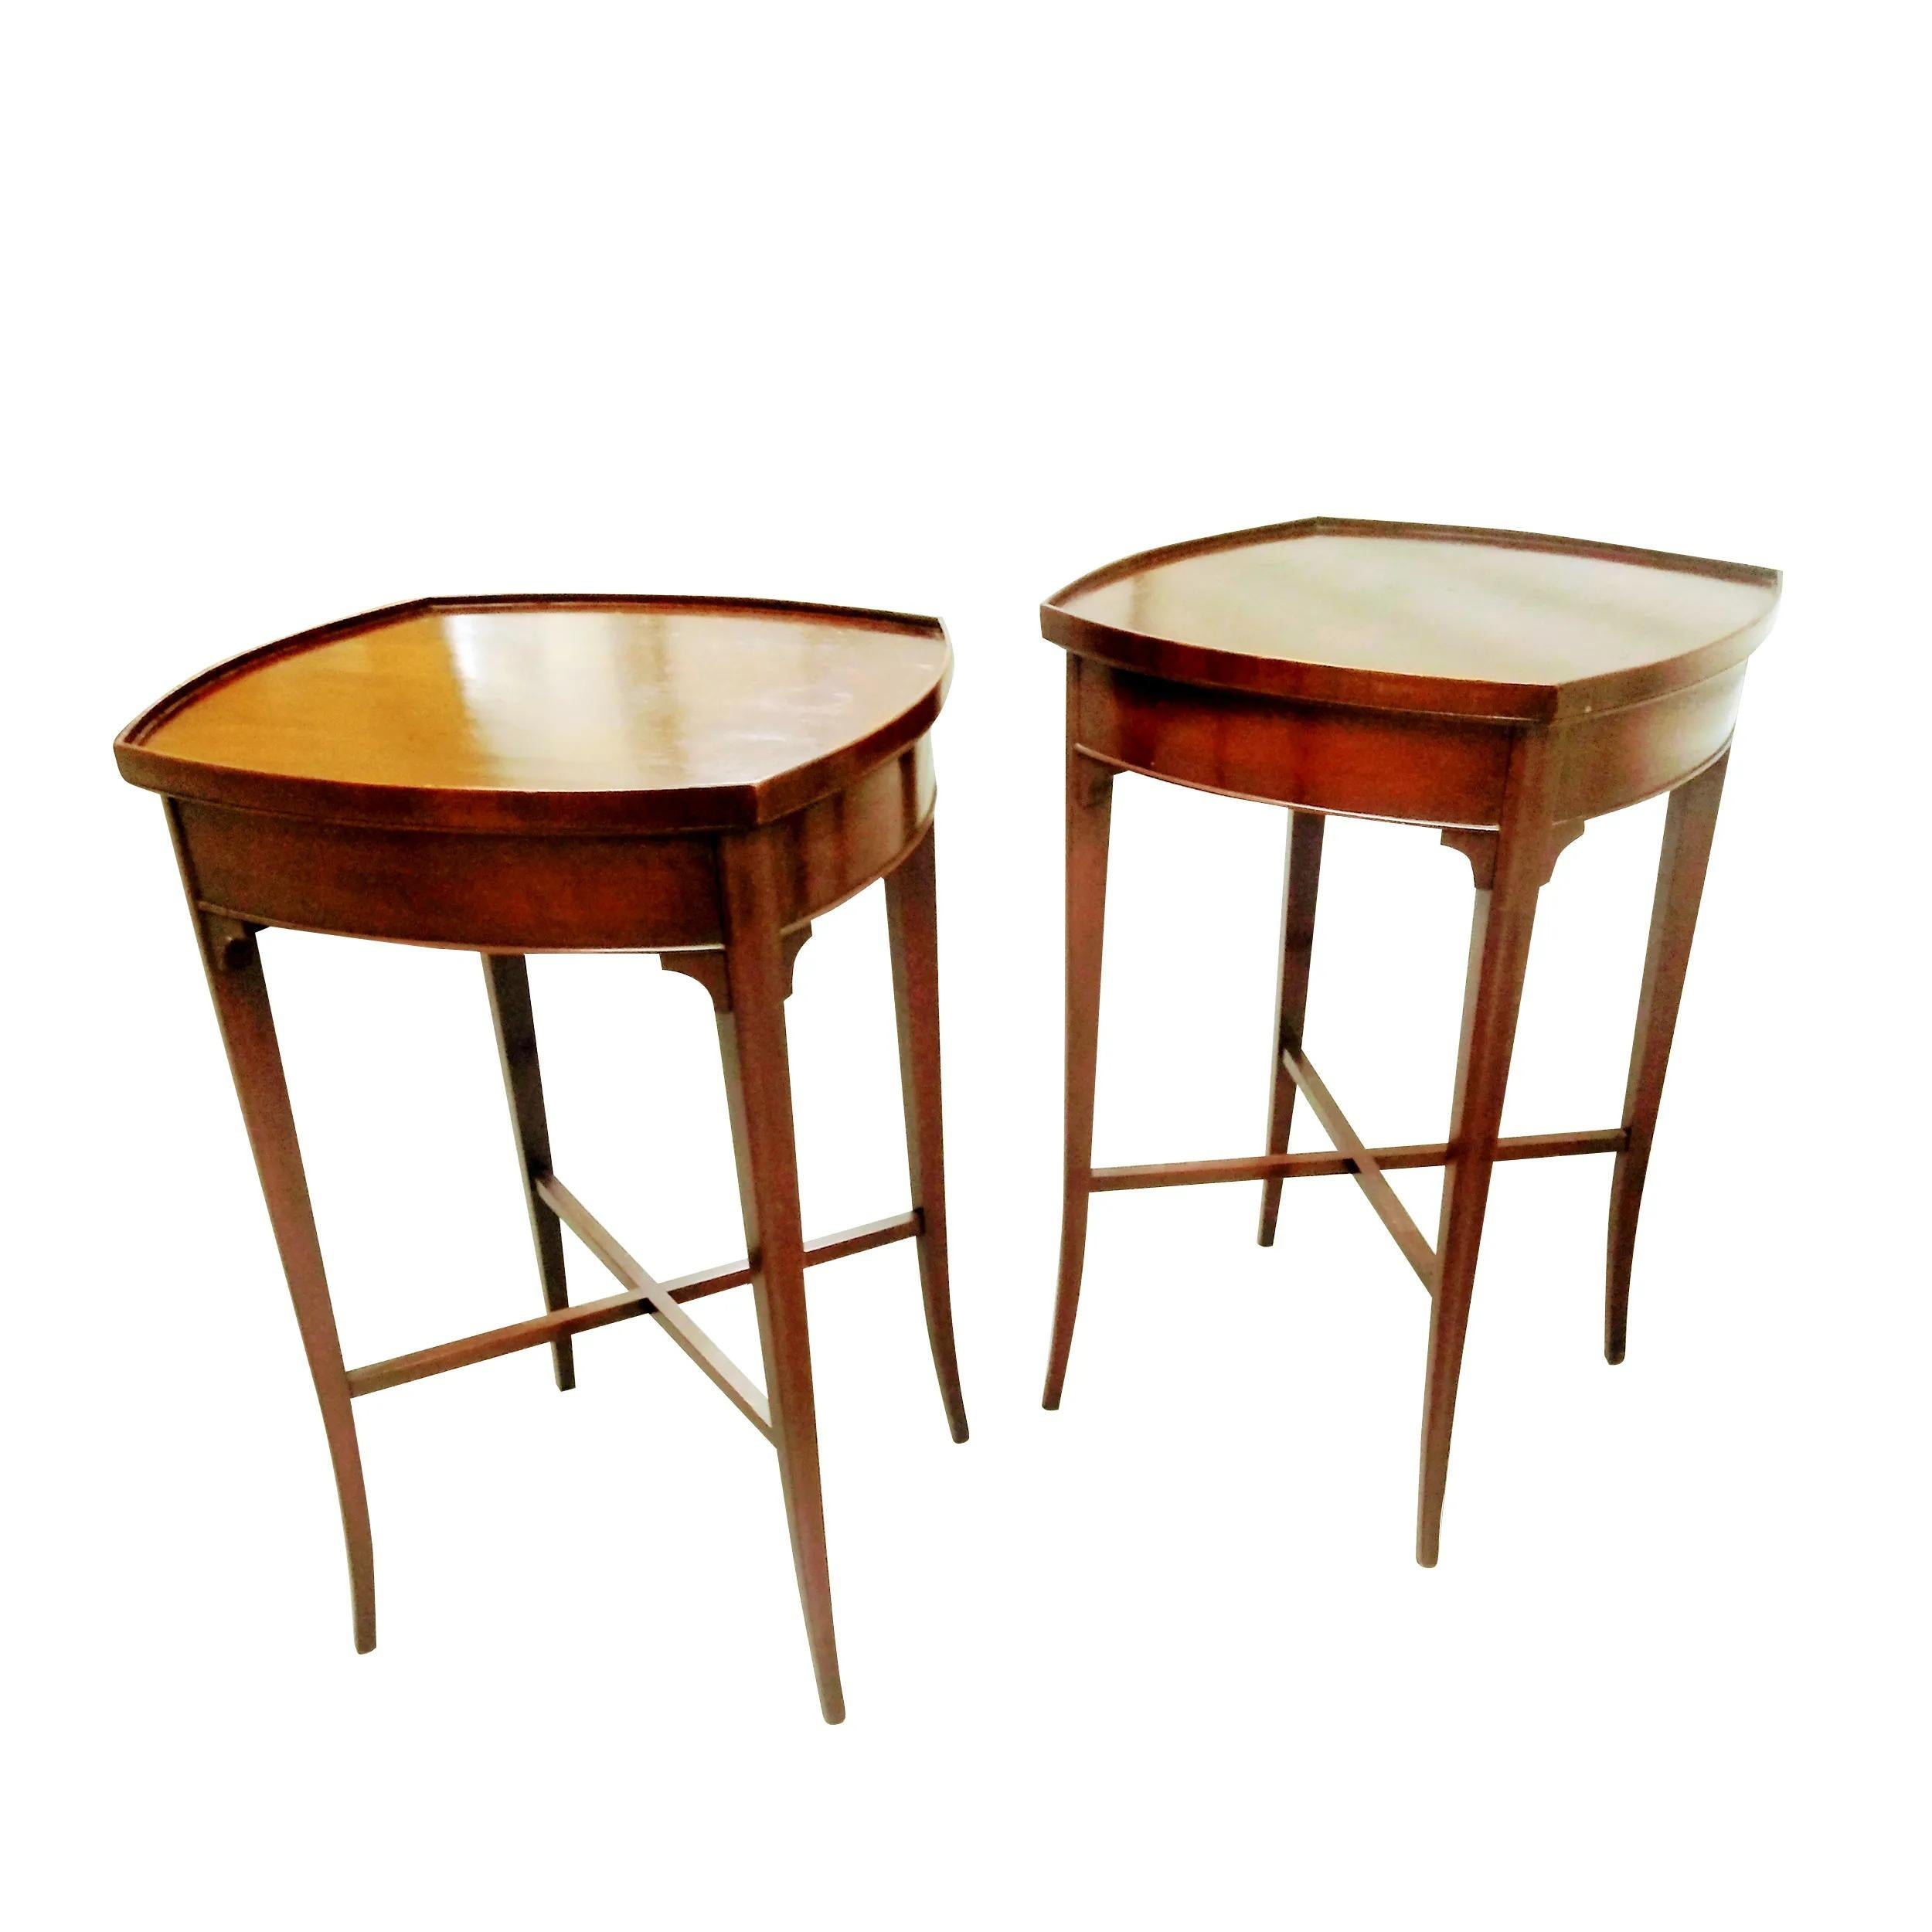 American Pair of Sheraton Style Side Tables